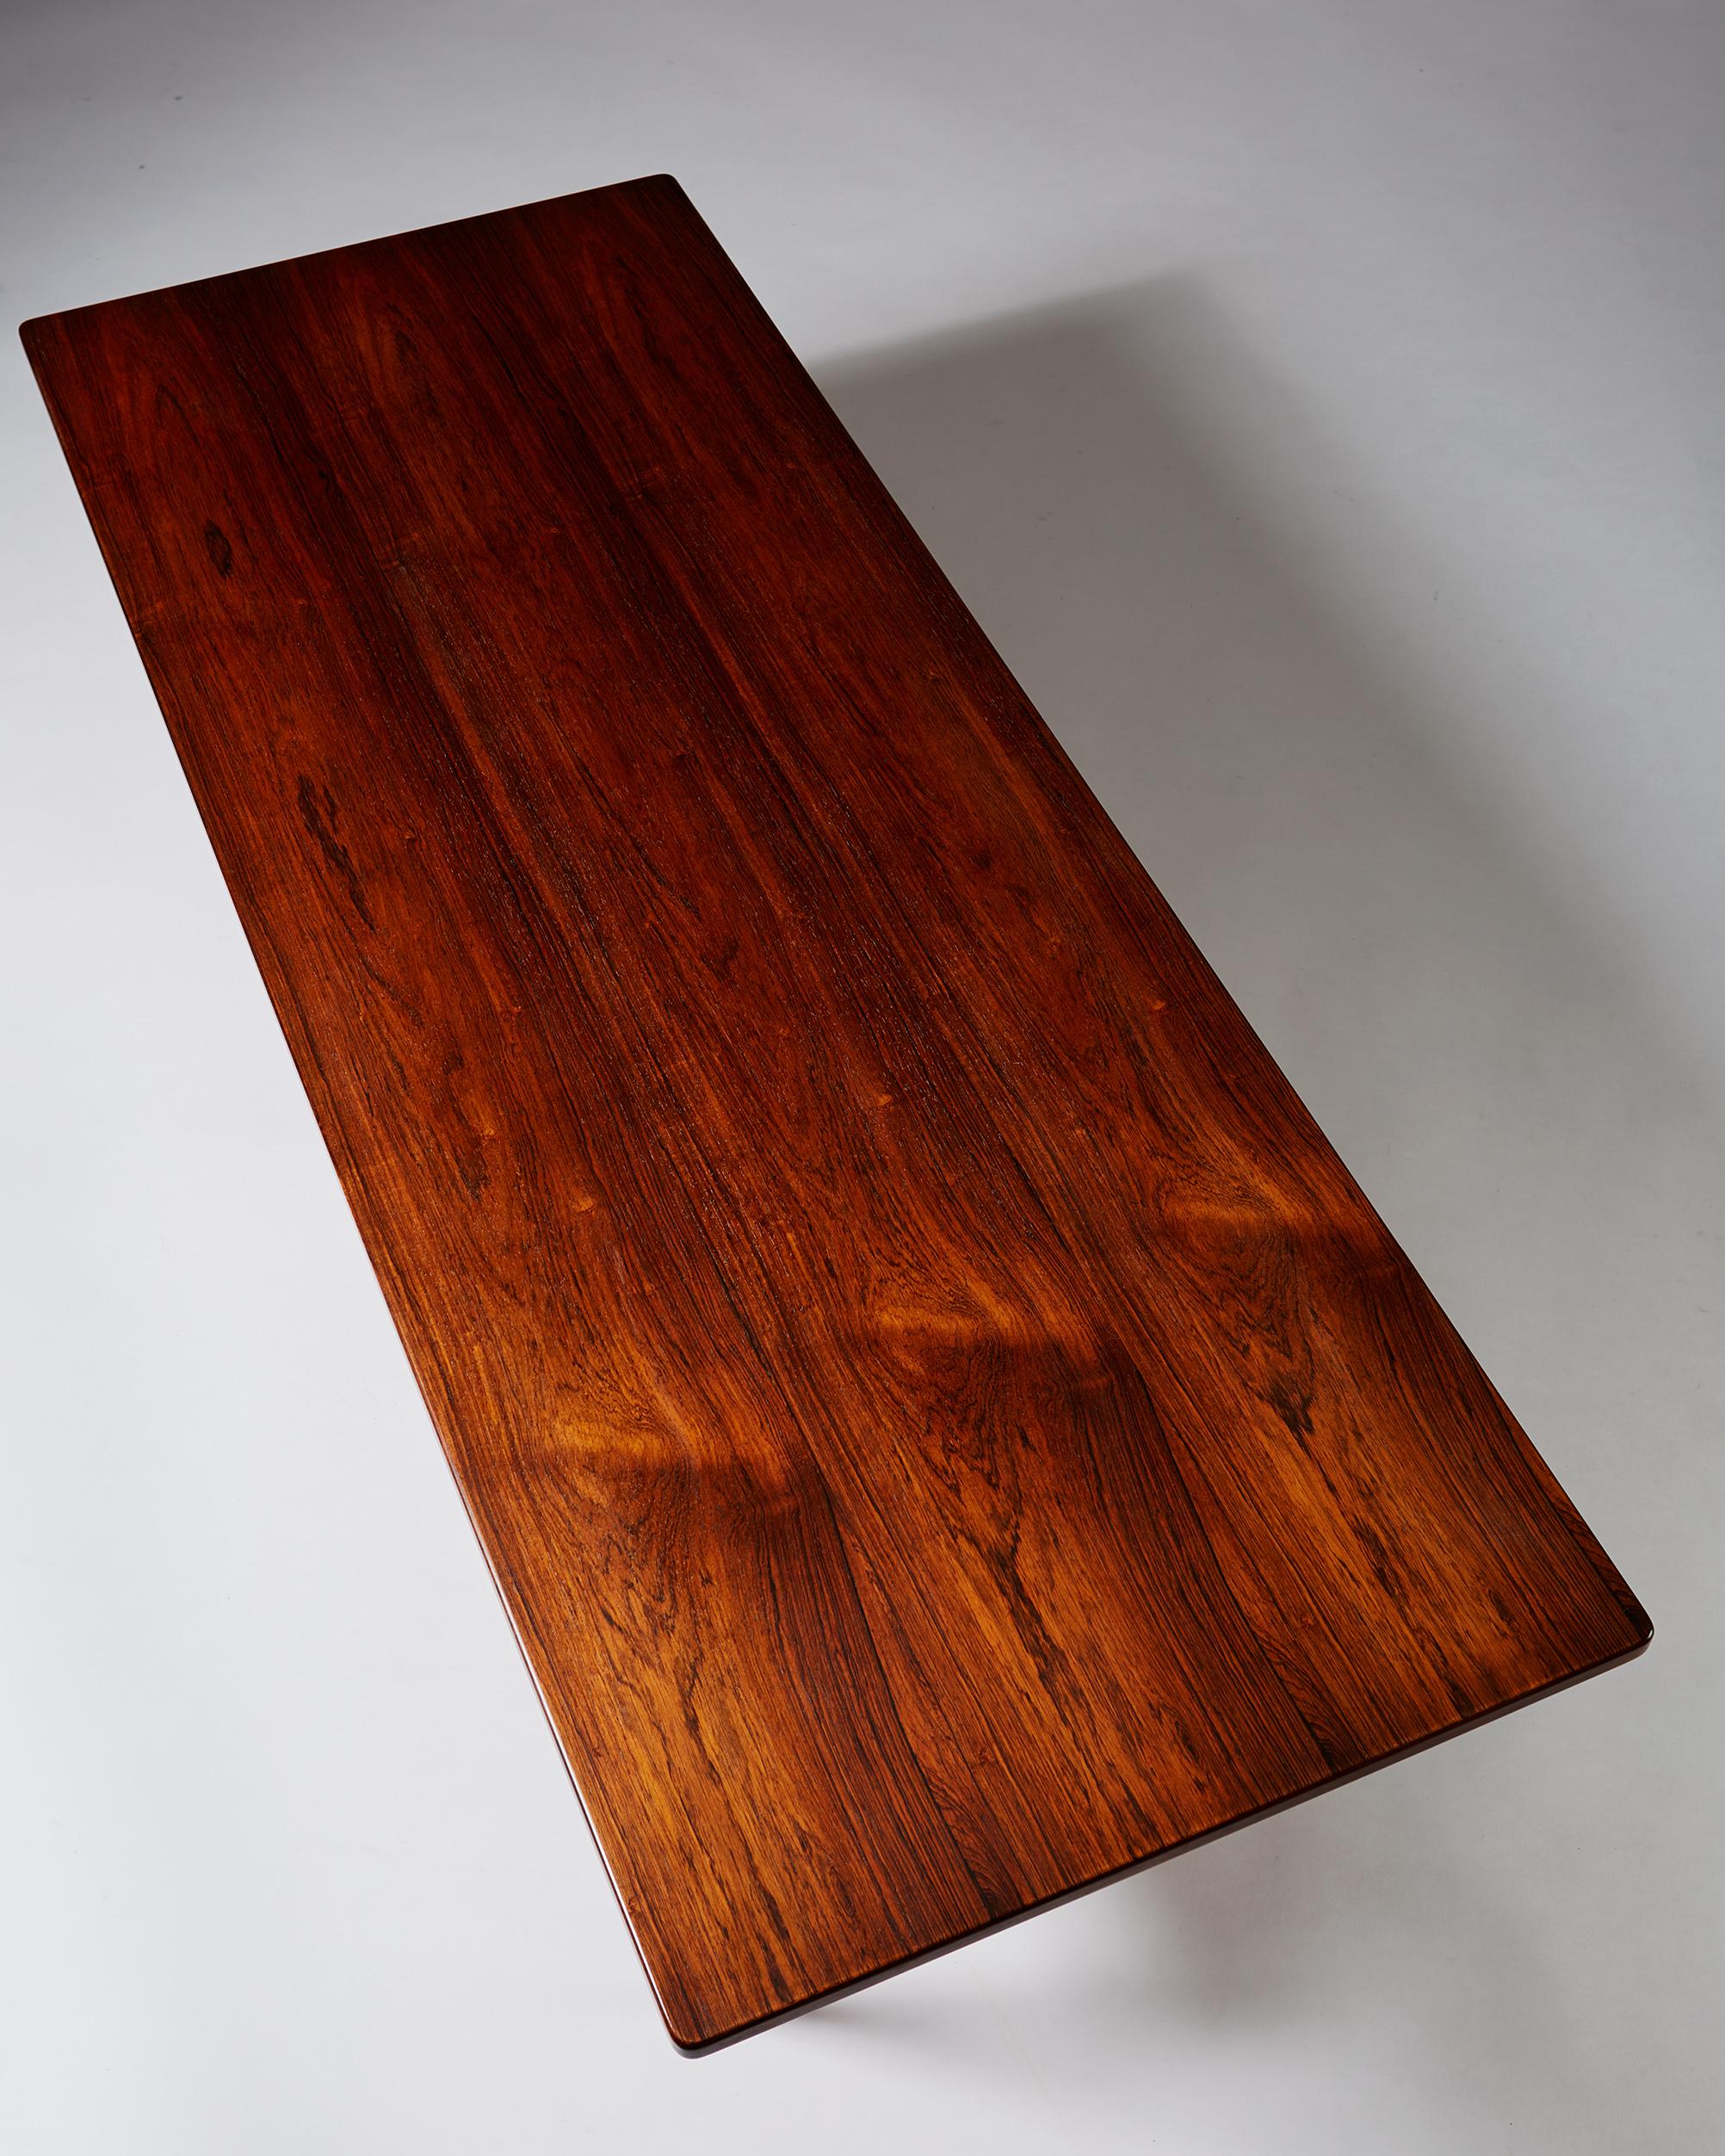 Occasional table designed by Ib Kofod-Larsen for Christensen & Larsen,
Denmark. 1960's.

Rosewood.

Stamped by the maker.

Measurements:
H: 50.2 cm/ 19 3/4